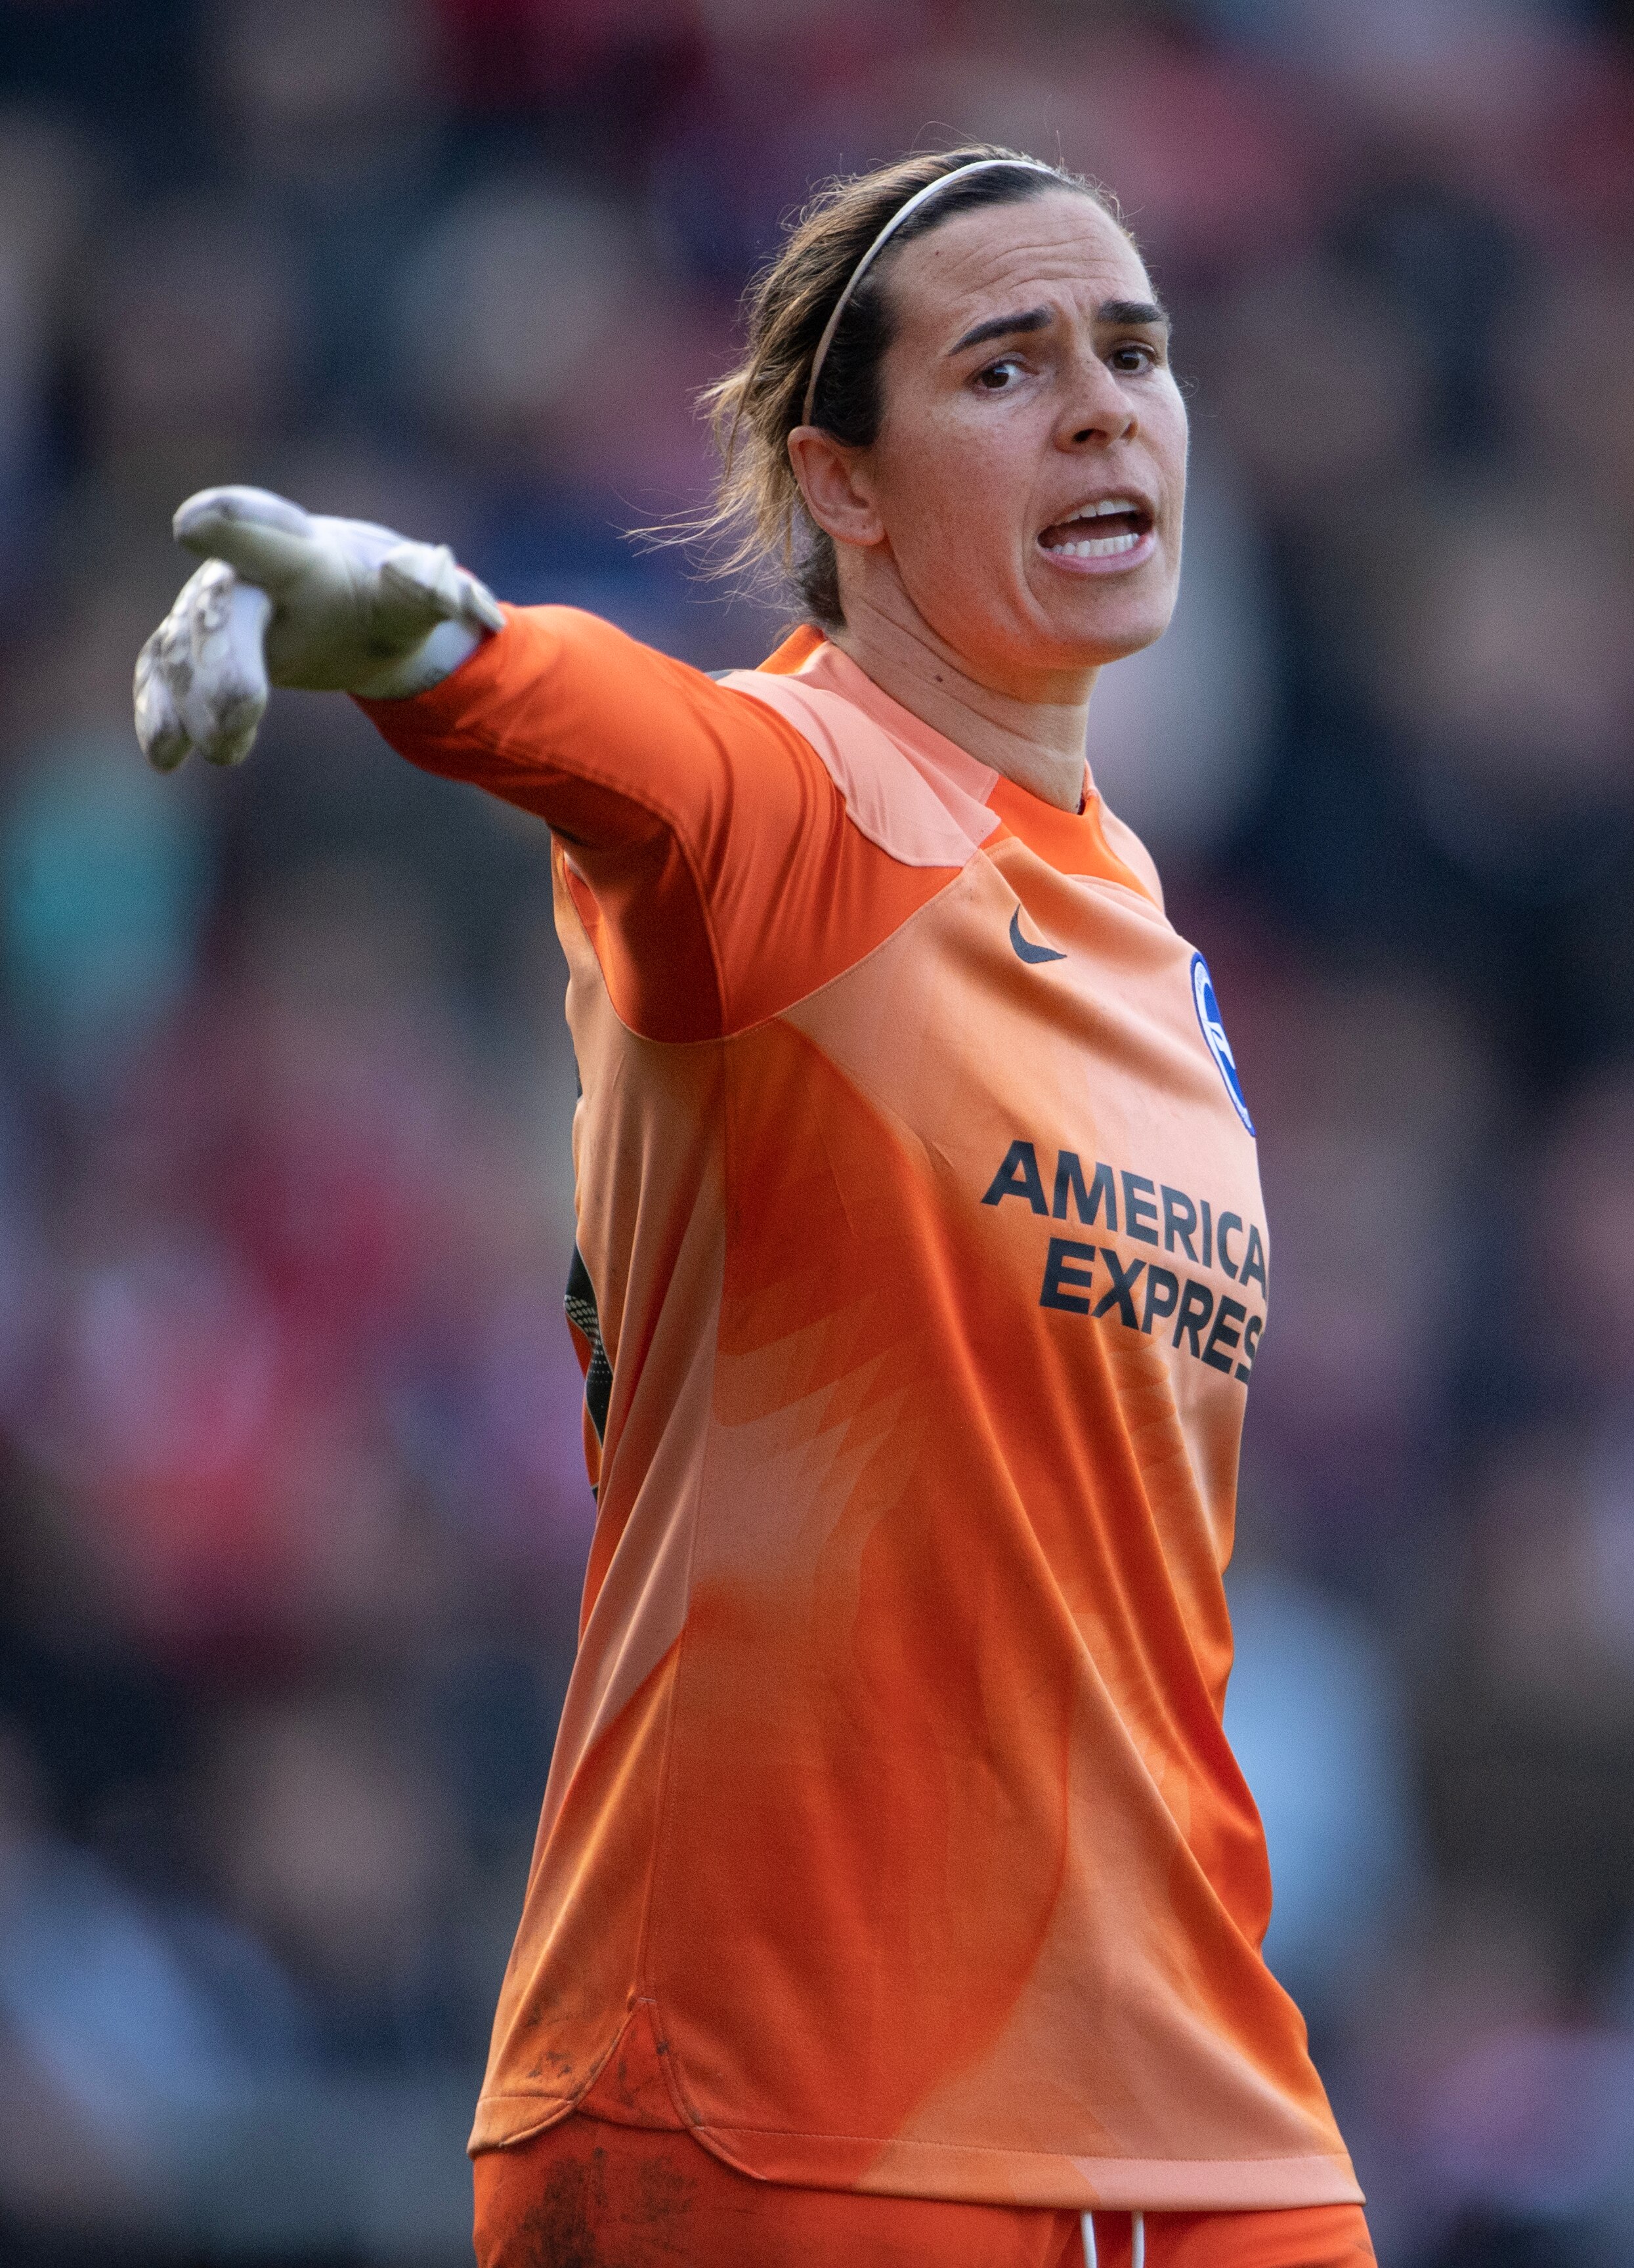 Australia goalkeeper Lydia Williams playing for English team Brighton. She is pointing and she is wearing an orange jersey.